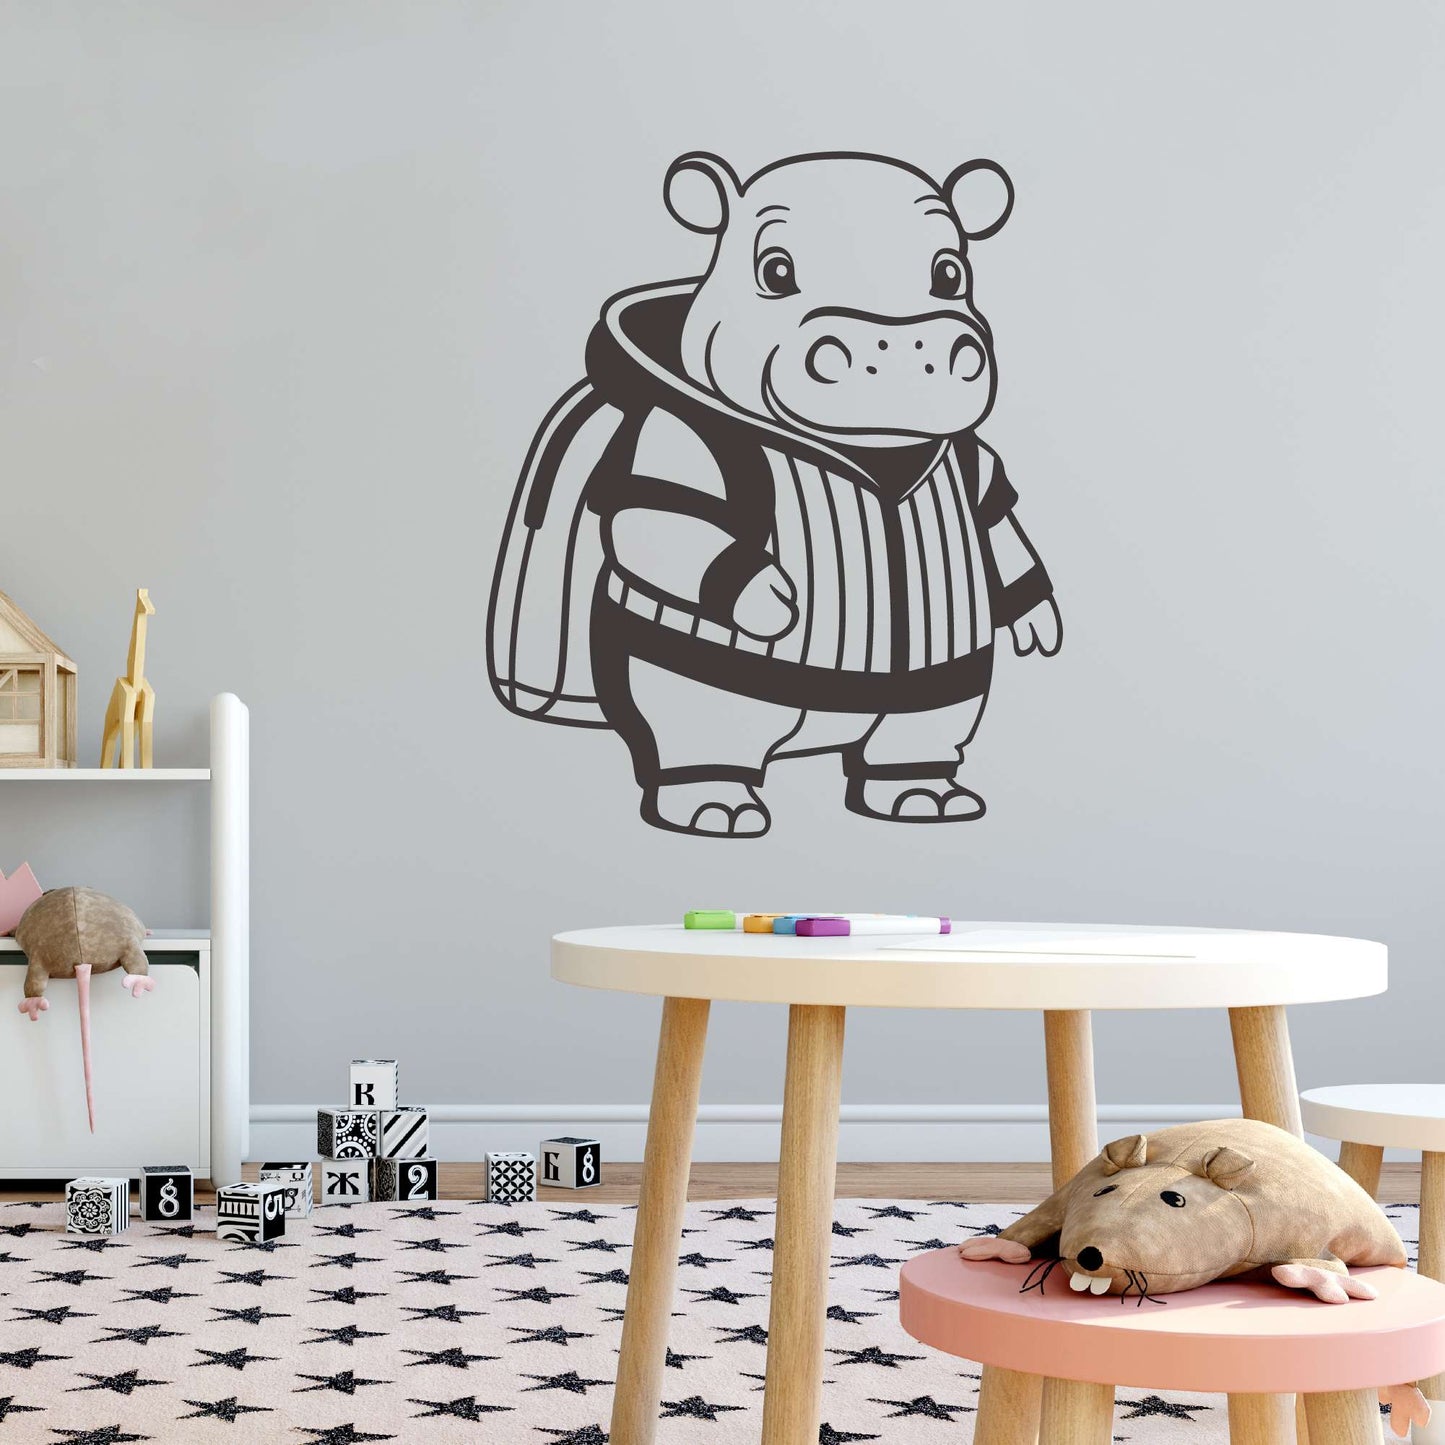 Design With Vinyl Adorable Animal Wall Decal Cute Cartoon Hippo Silhouette Kids Room Design